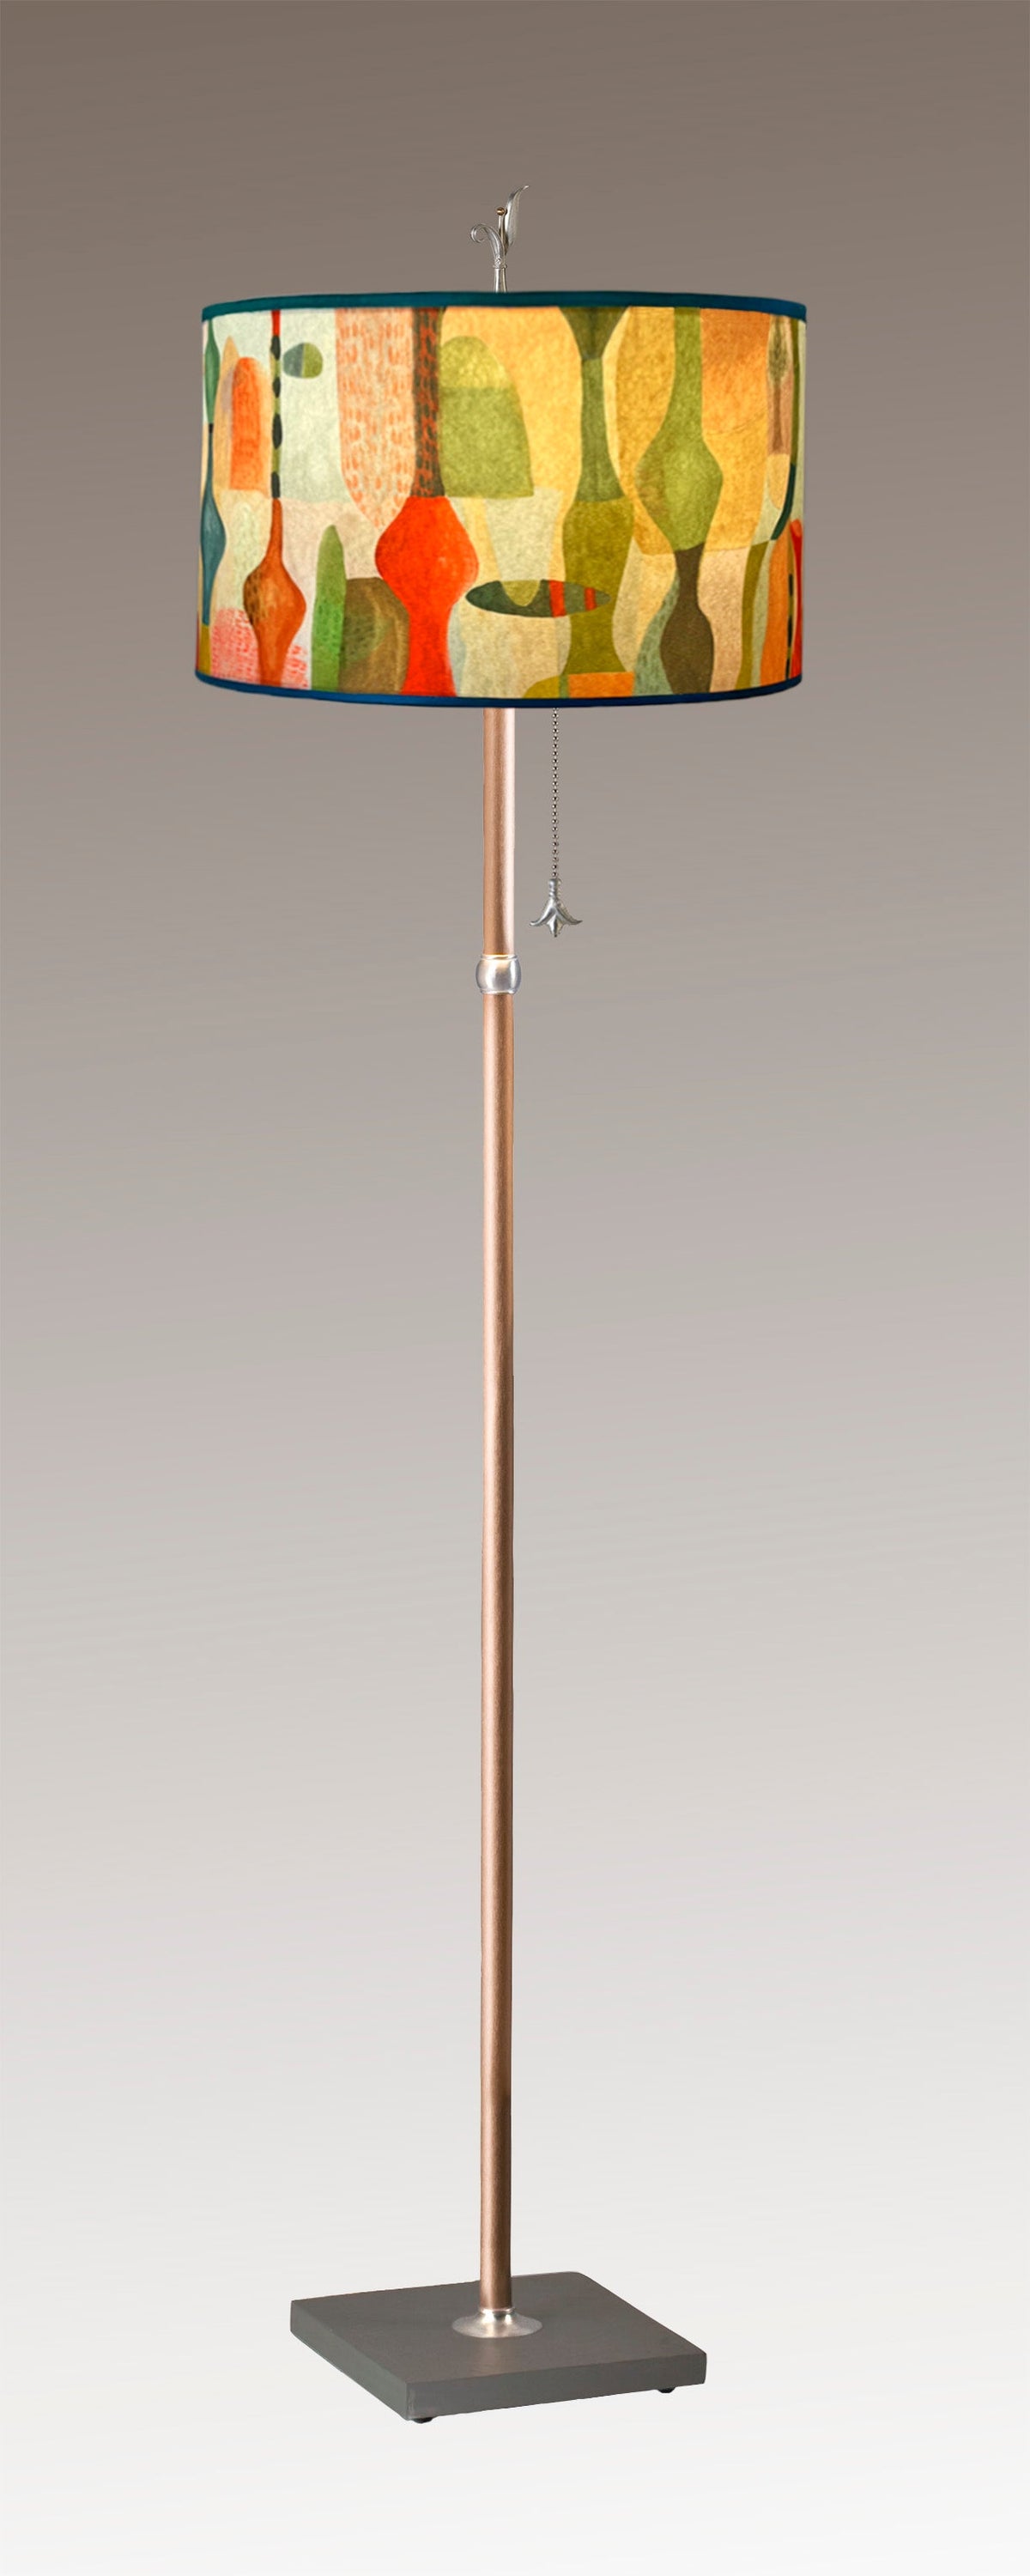 Copper Floor Lamp with Large Drum Shade in Riviera in Poppy